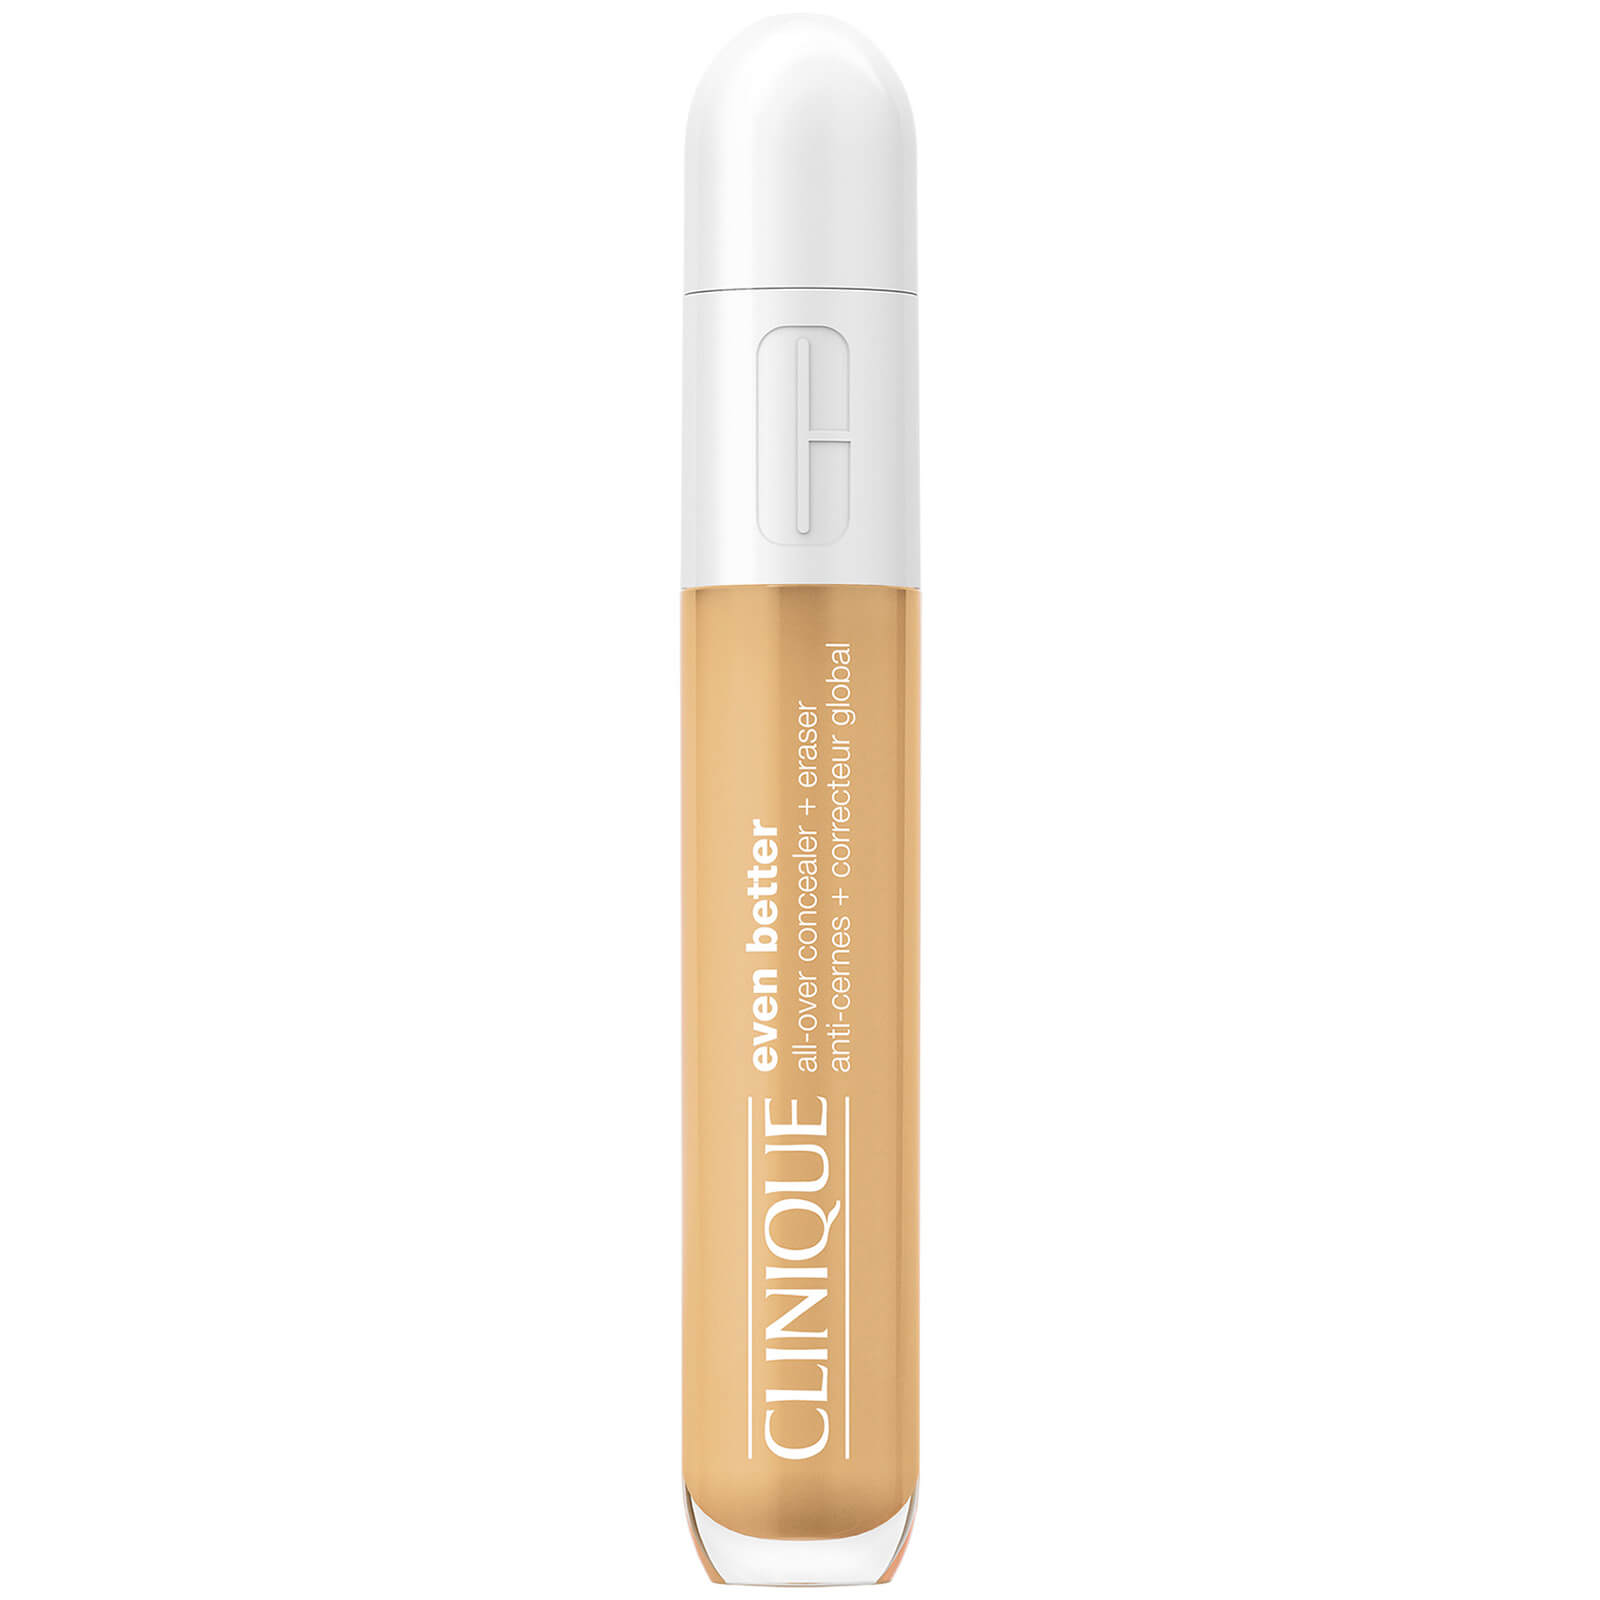 Clinique Even Better All-Over Concealer and Eraser 6ml (Various Shades) - WN 48 Oat